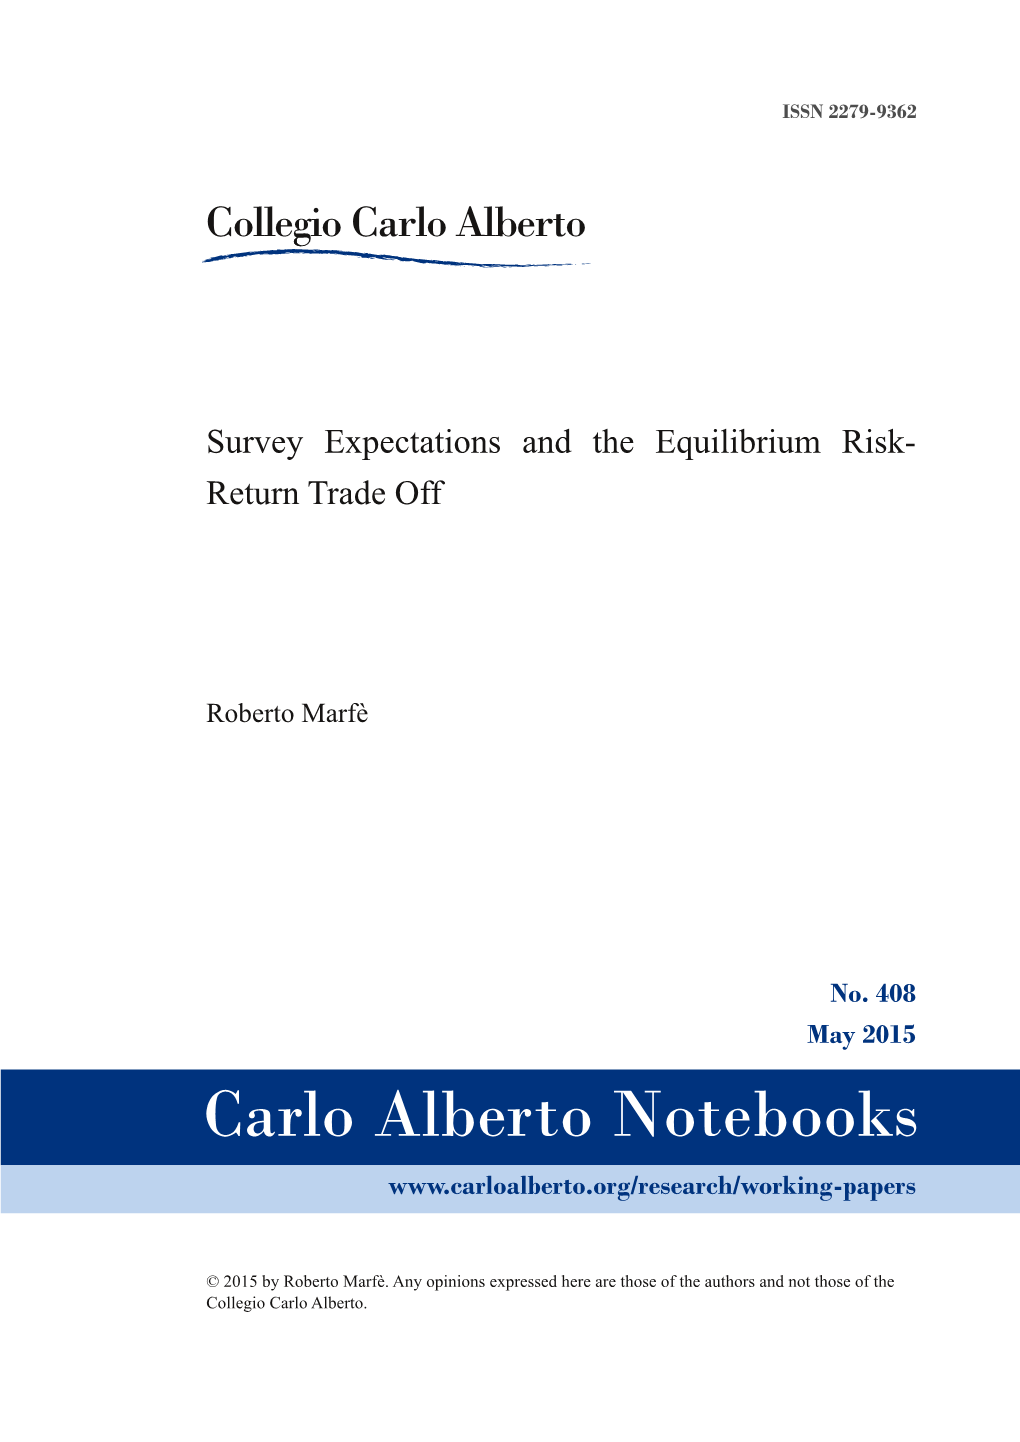 Survey Expectations and the Equilibrium Risk-Return Trade